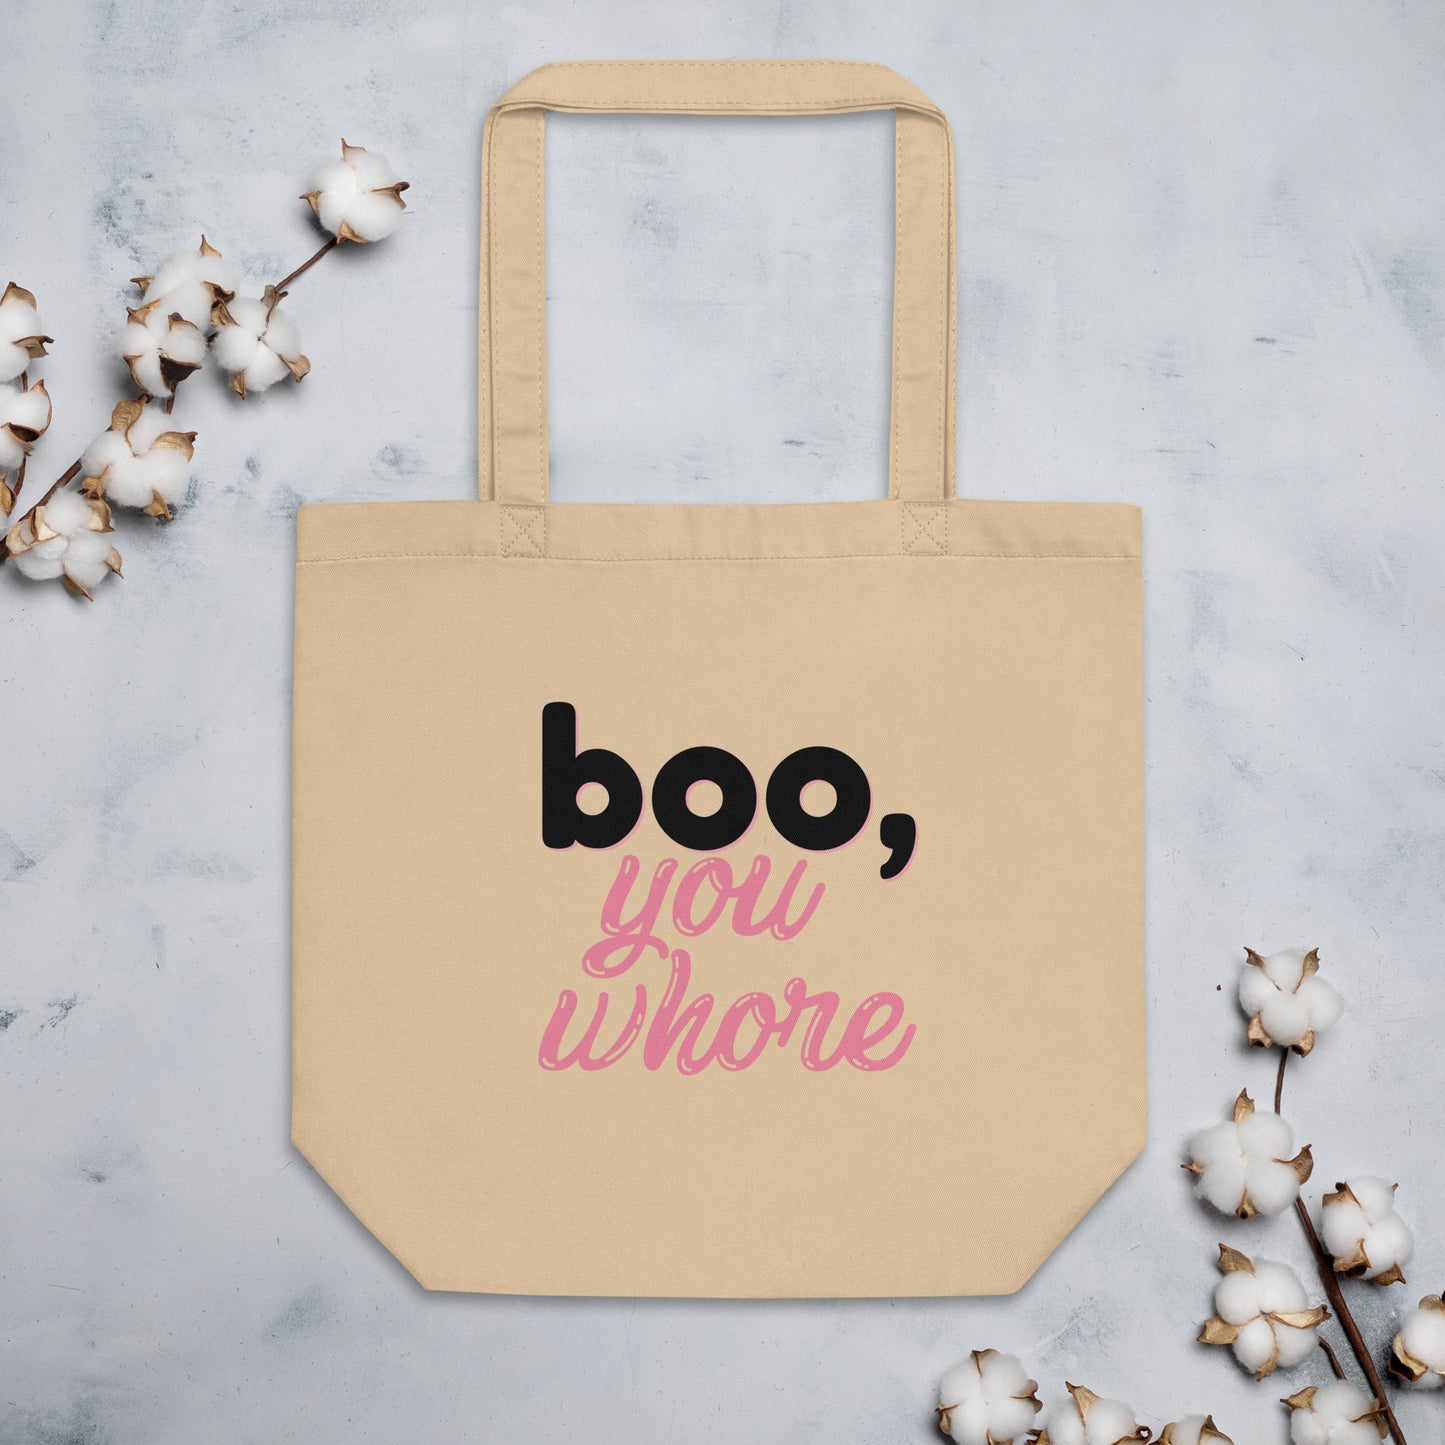 Mean Girls - Boo you Whore Tote